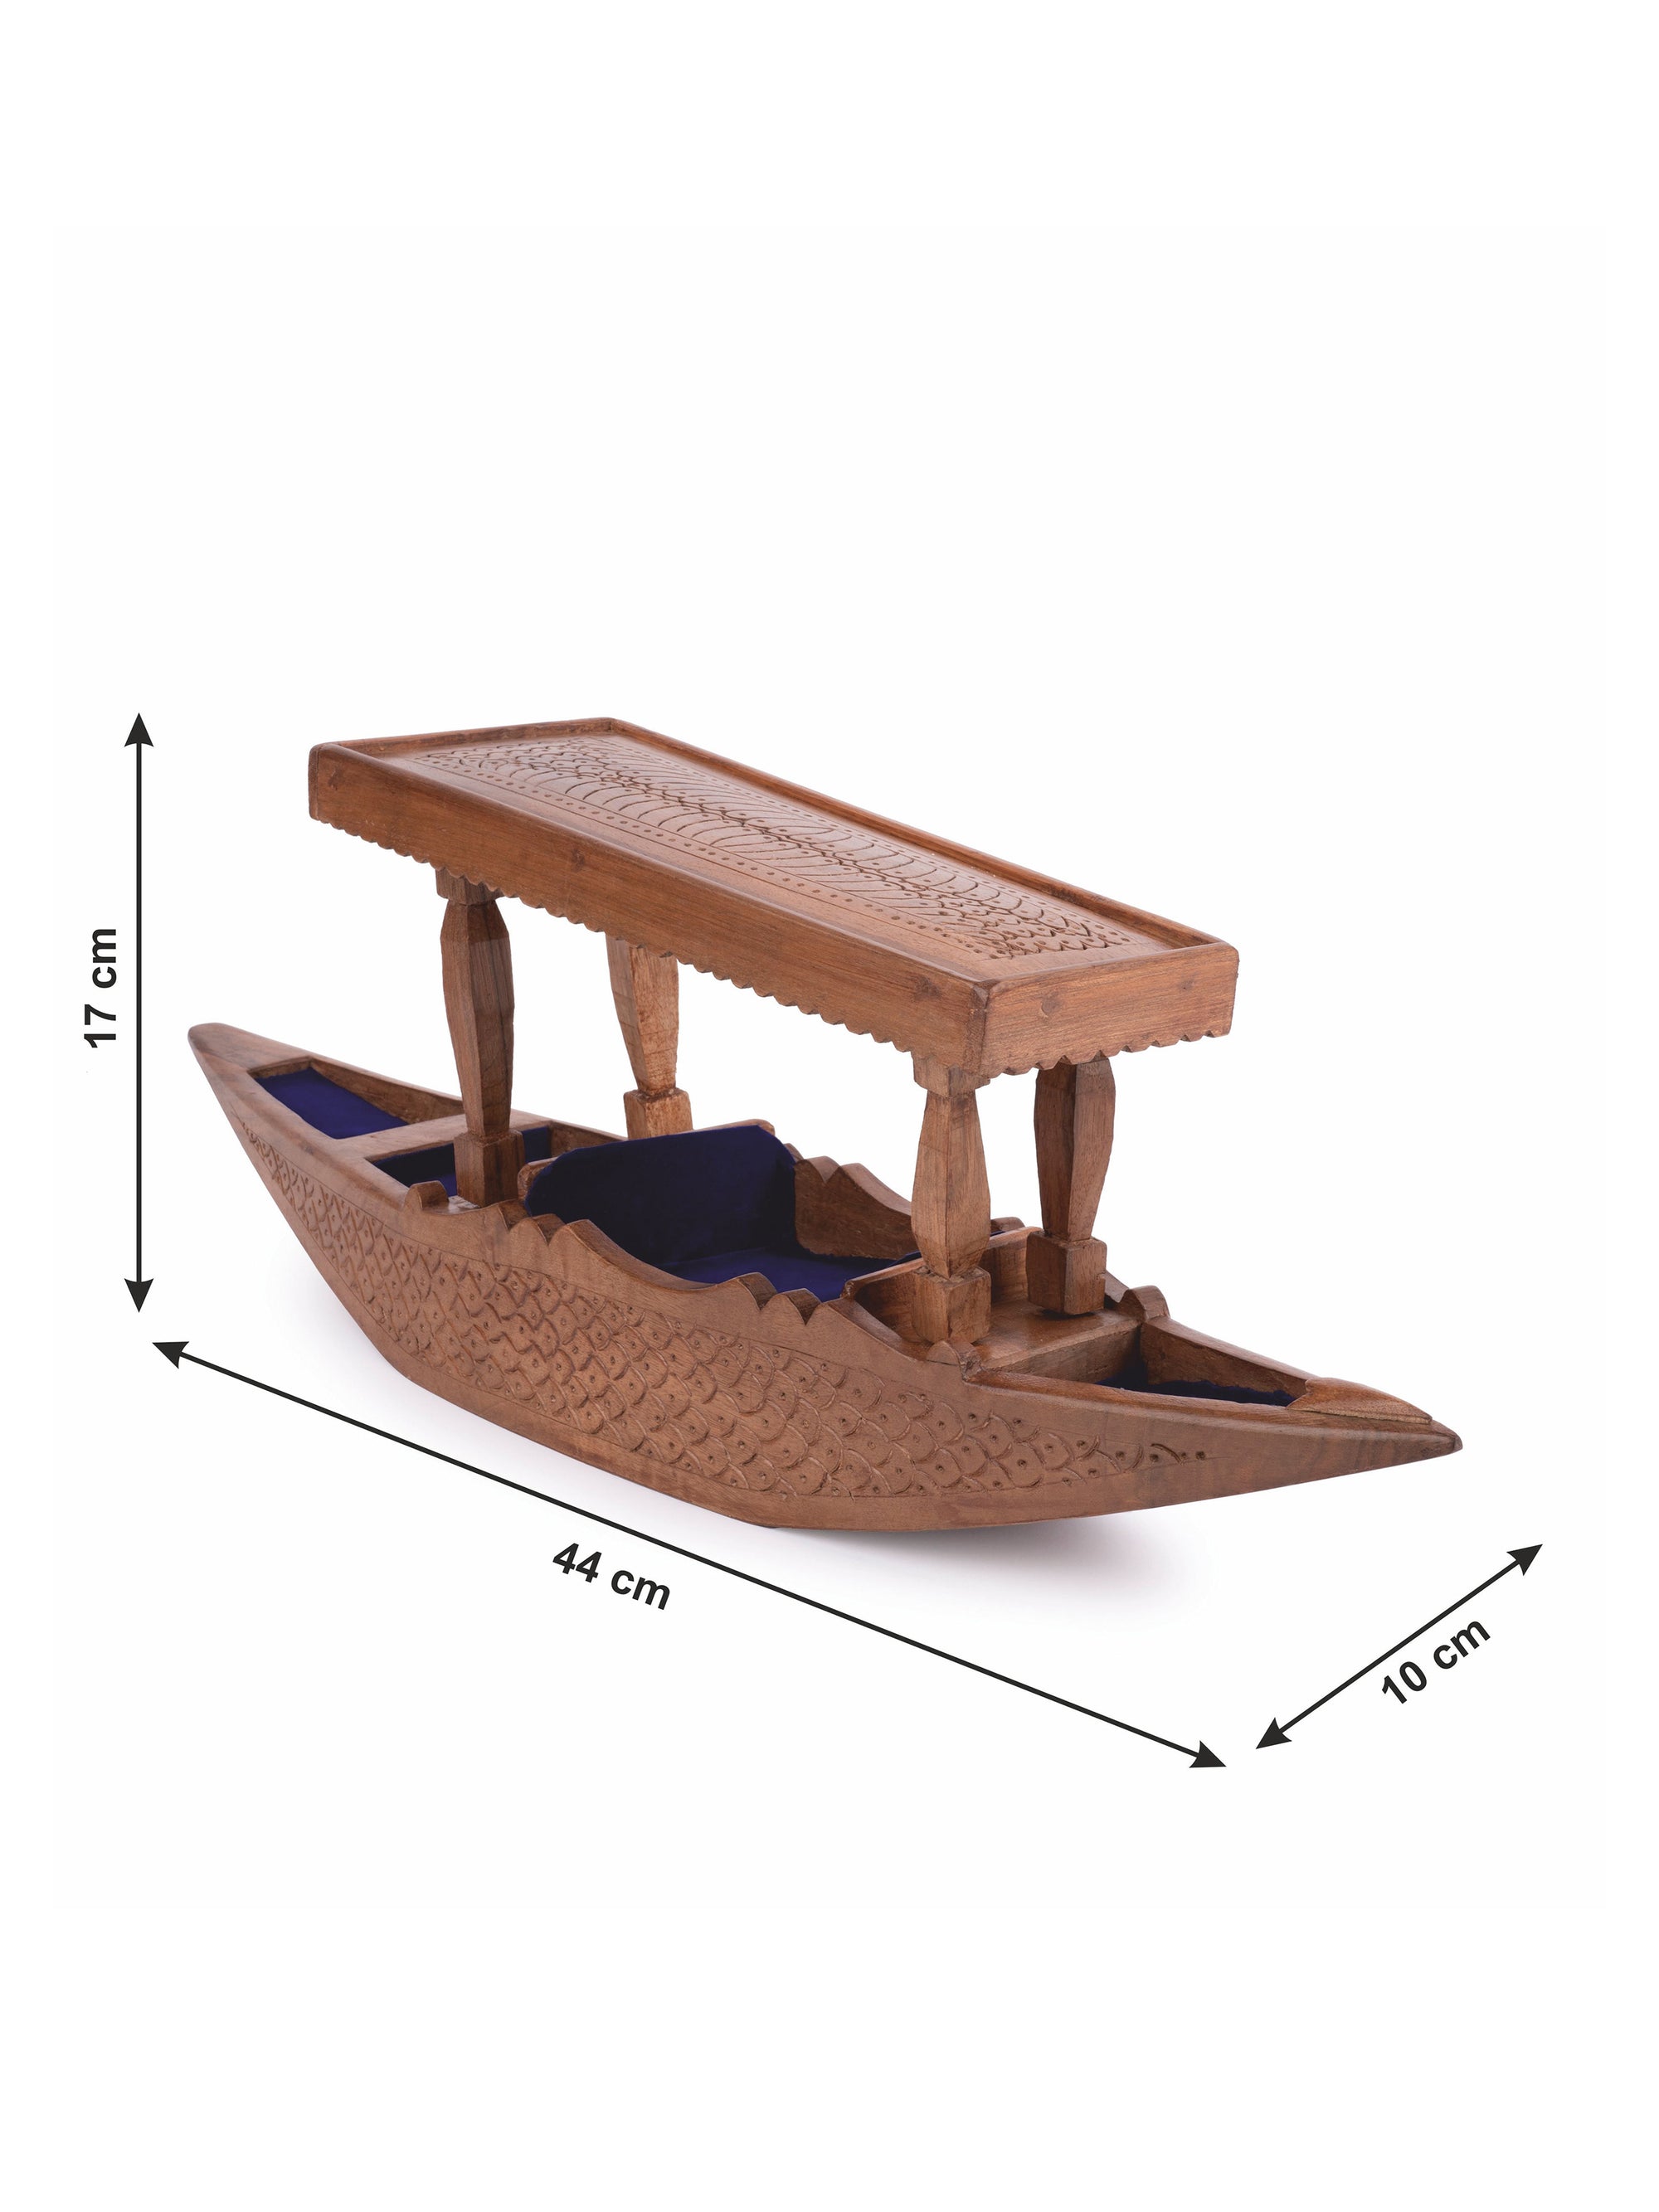 Walnut wood carved Kashmir Boat or Shikara Decor piece- 18 inches long - The Heritage Artifacts